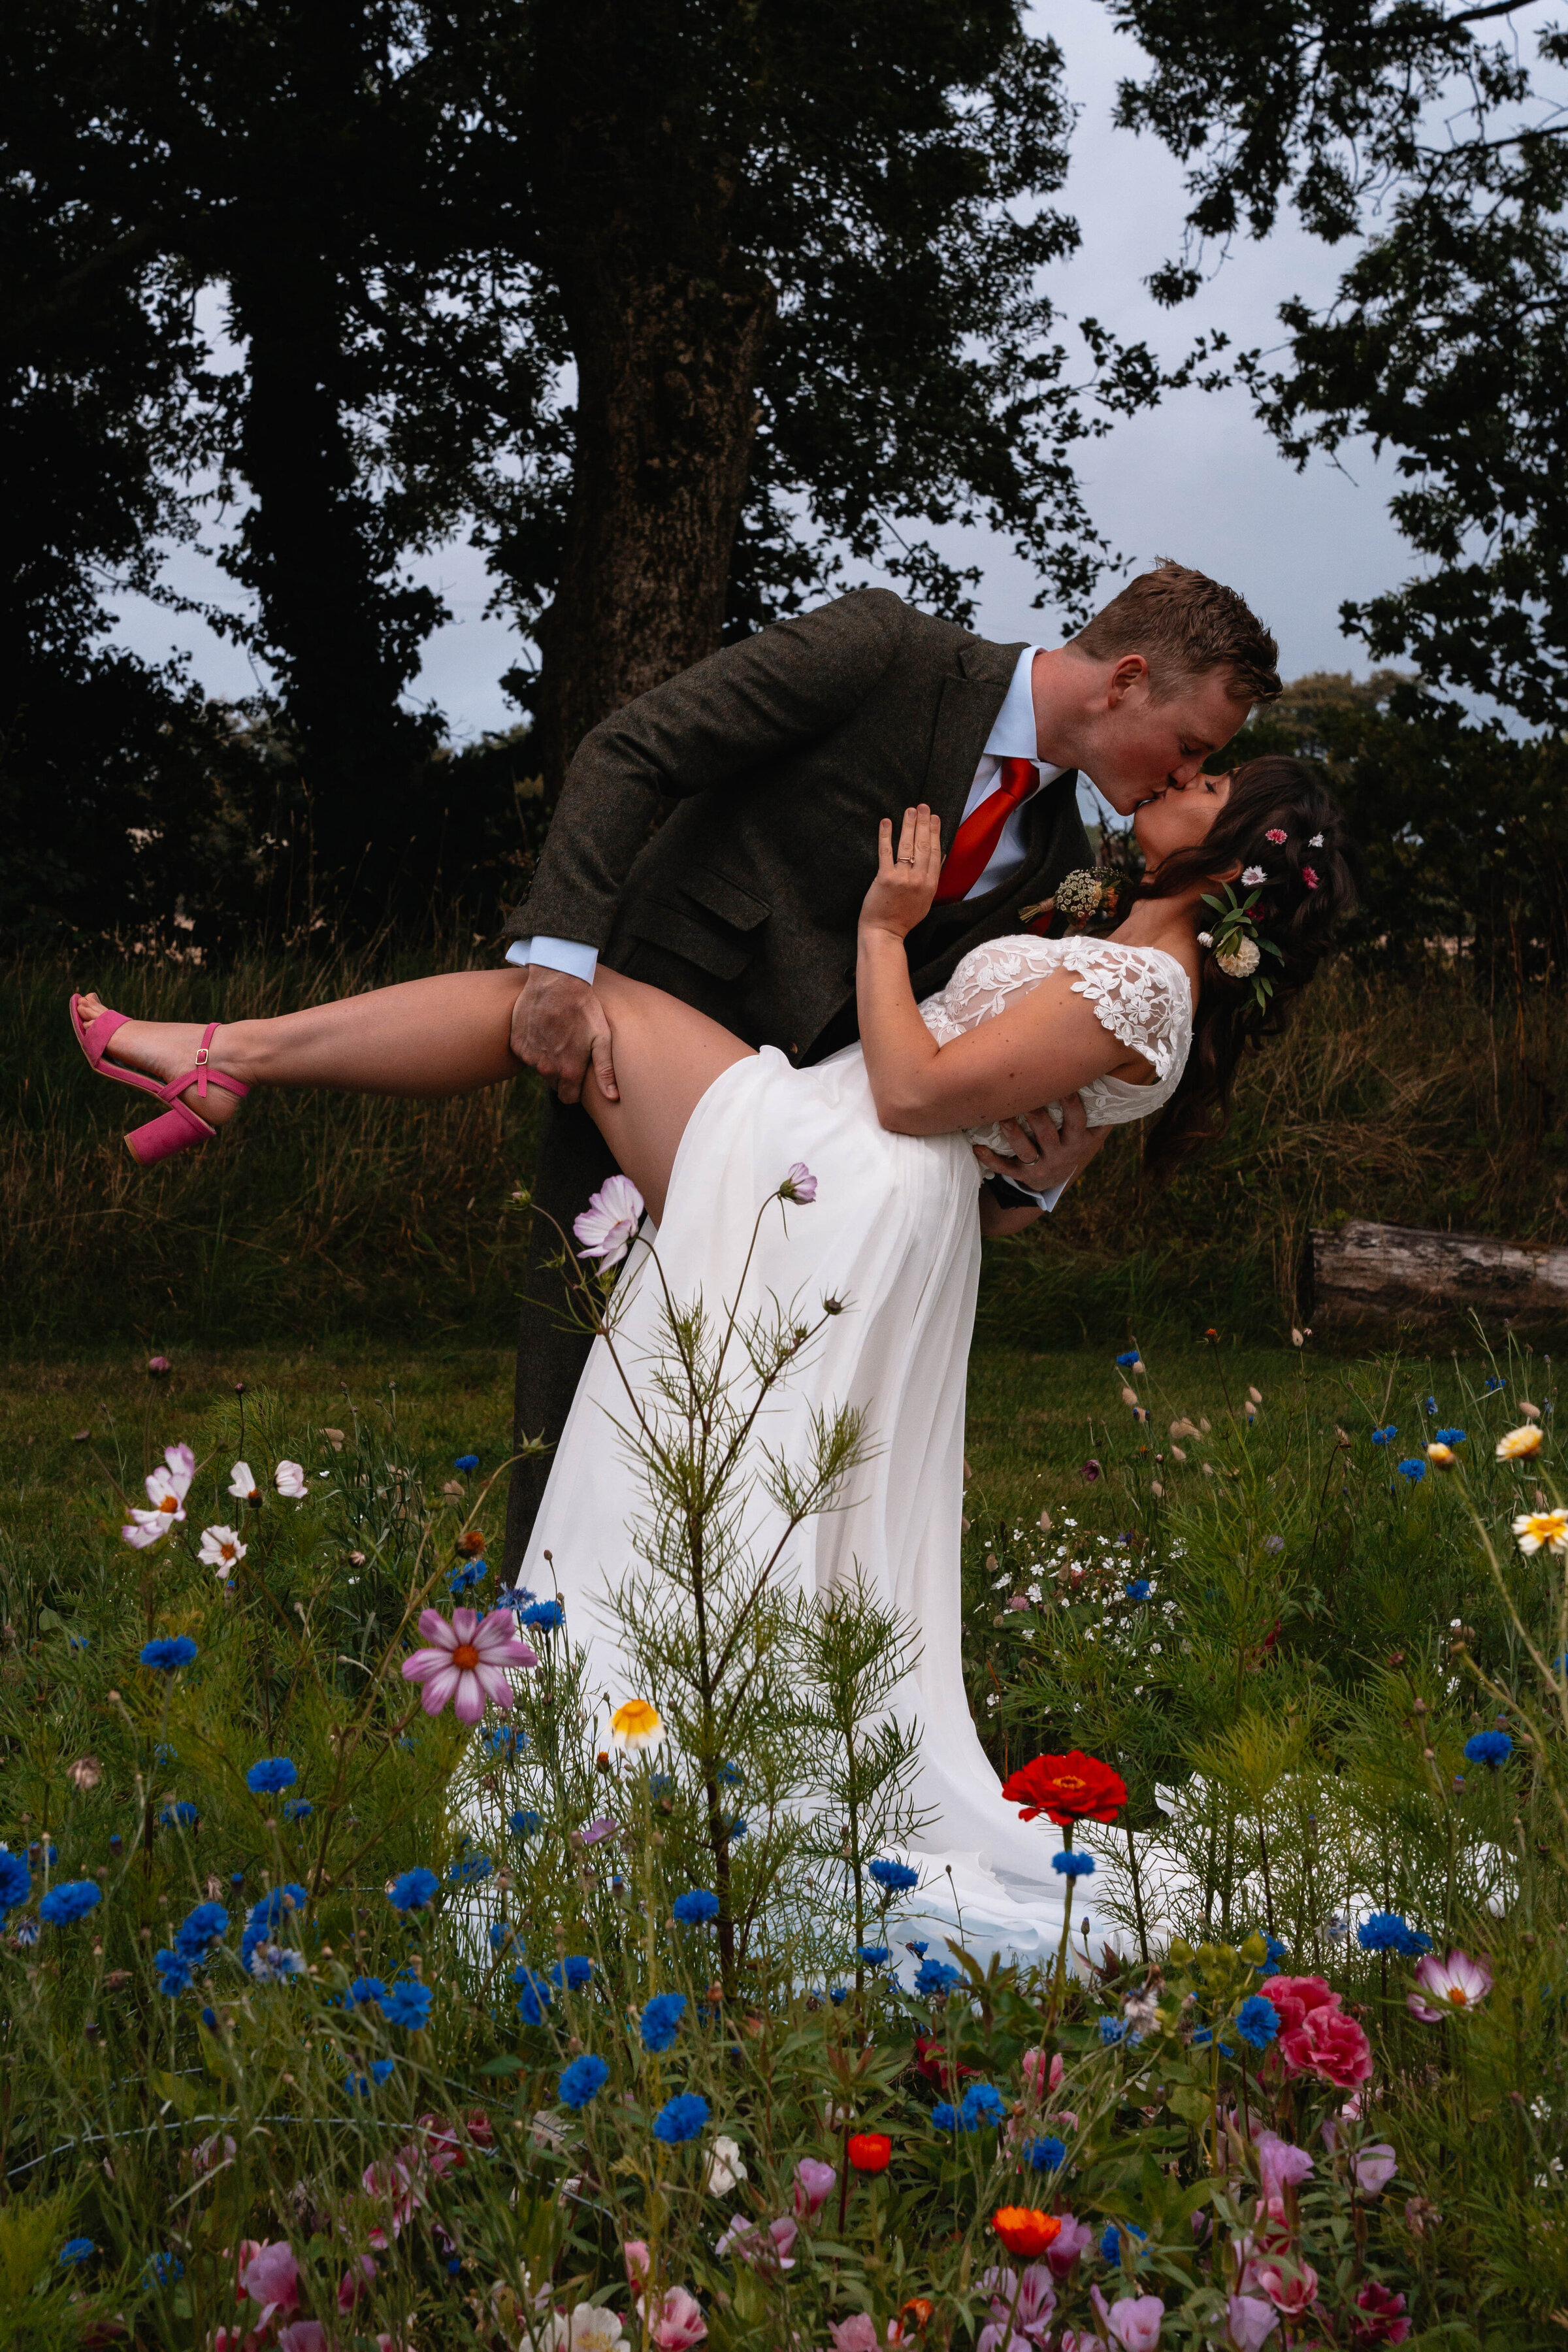 Bride and Groom in wedding attire in a dip kiss surrounded by wildflowers